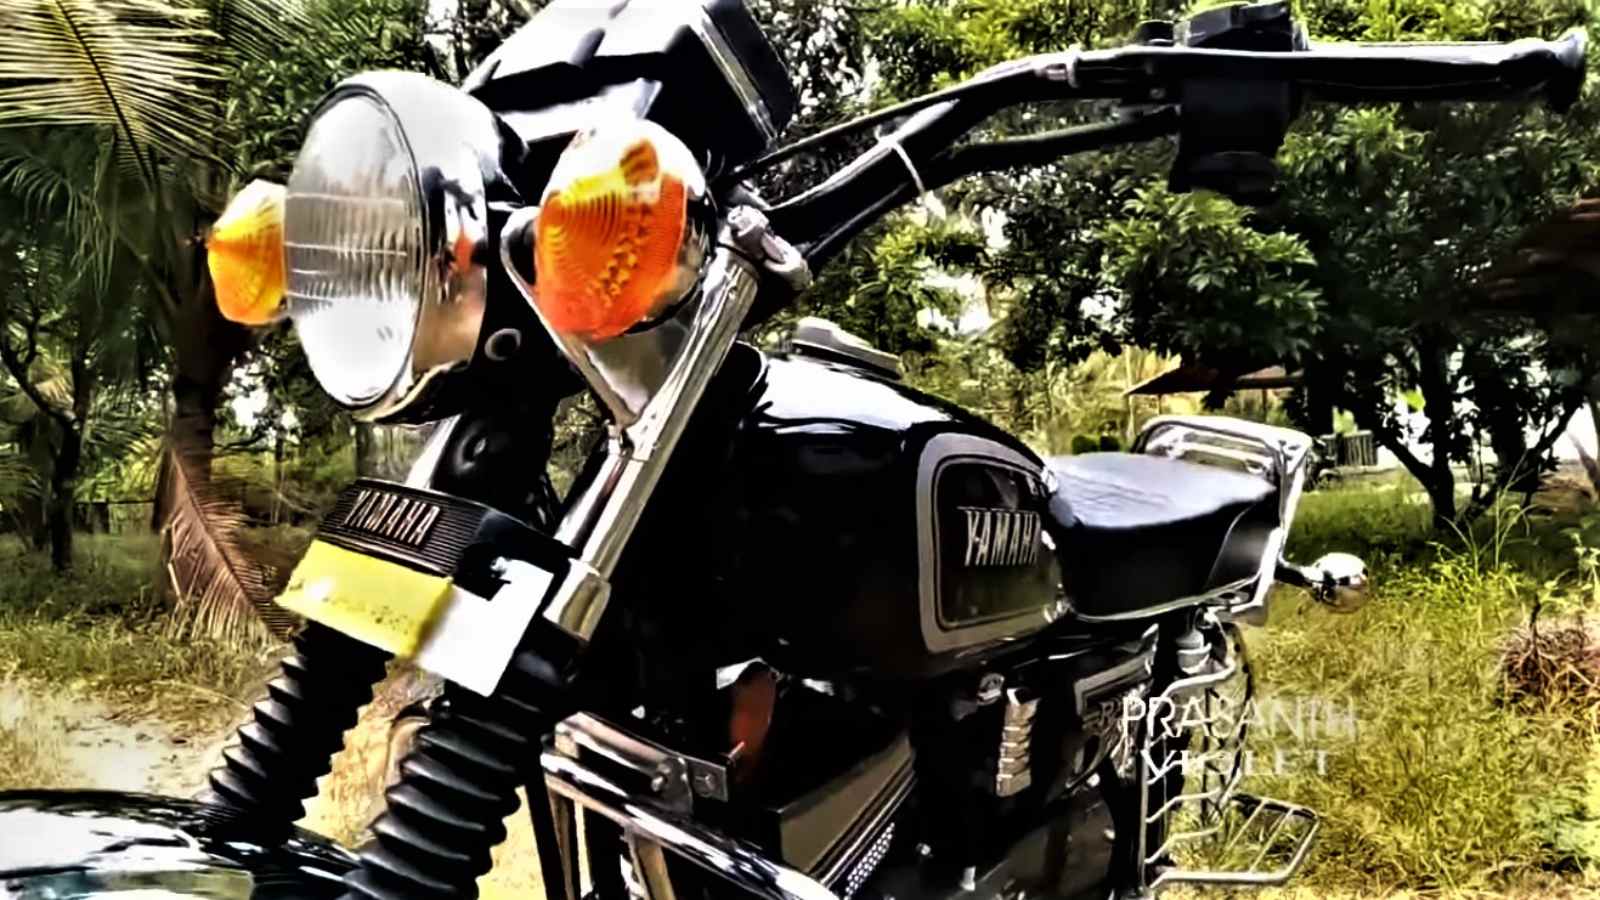 Yamaha RX 100 Goes From Drab To Fab In Five Minutes Of Time